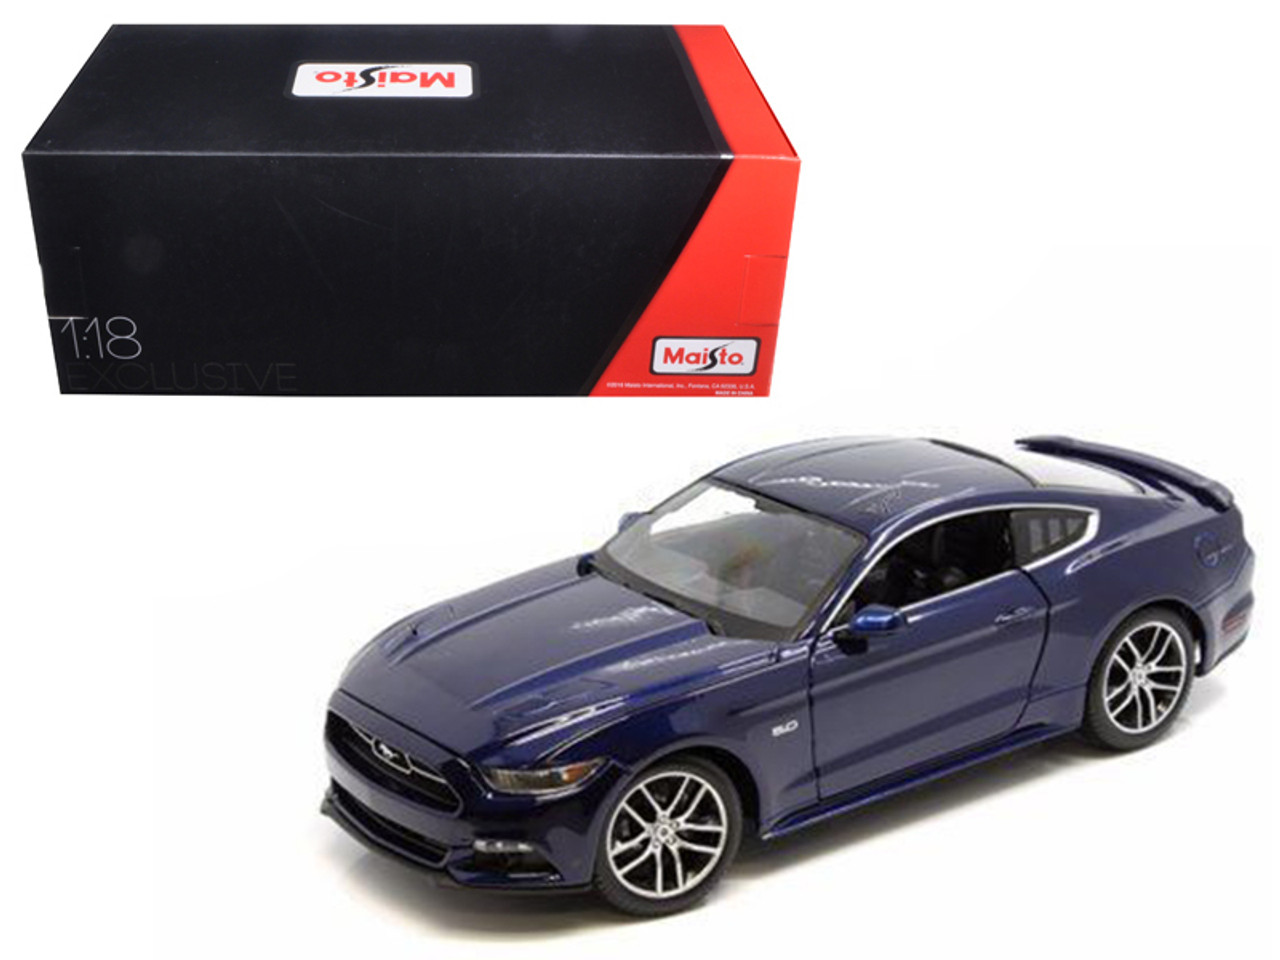 2015 Ford Mustang GT Dark Blue Exclusive Edition 1/18 Diecast Model Car by Maisto